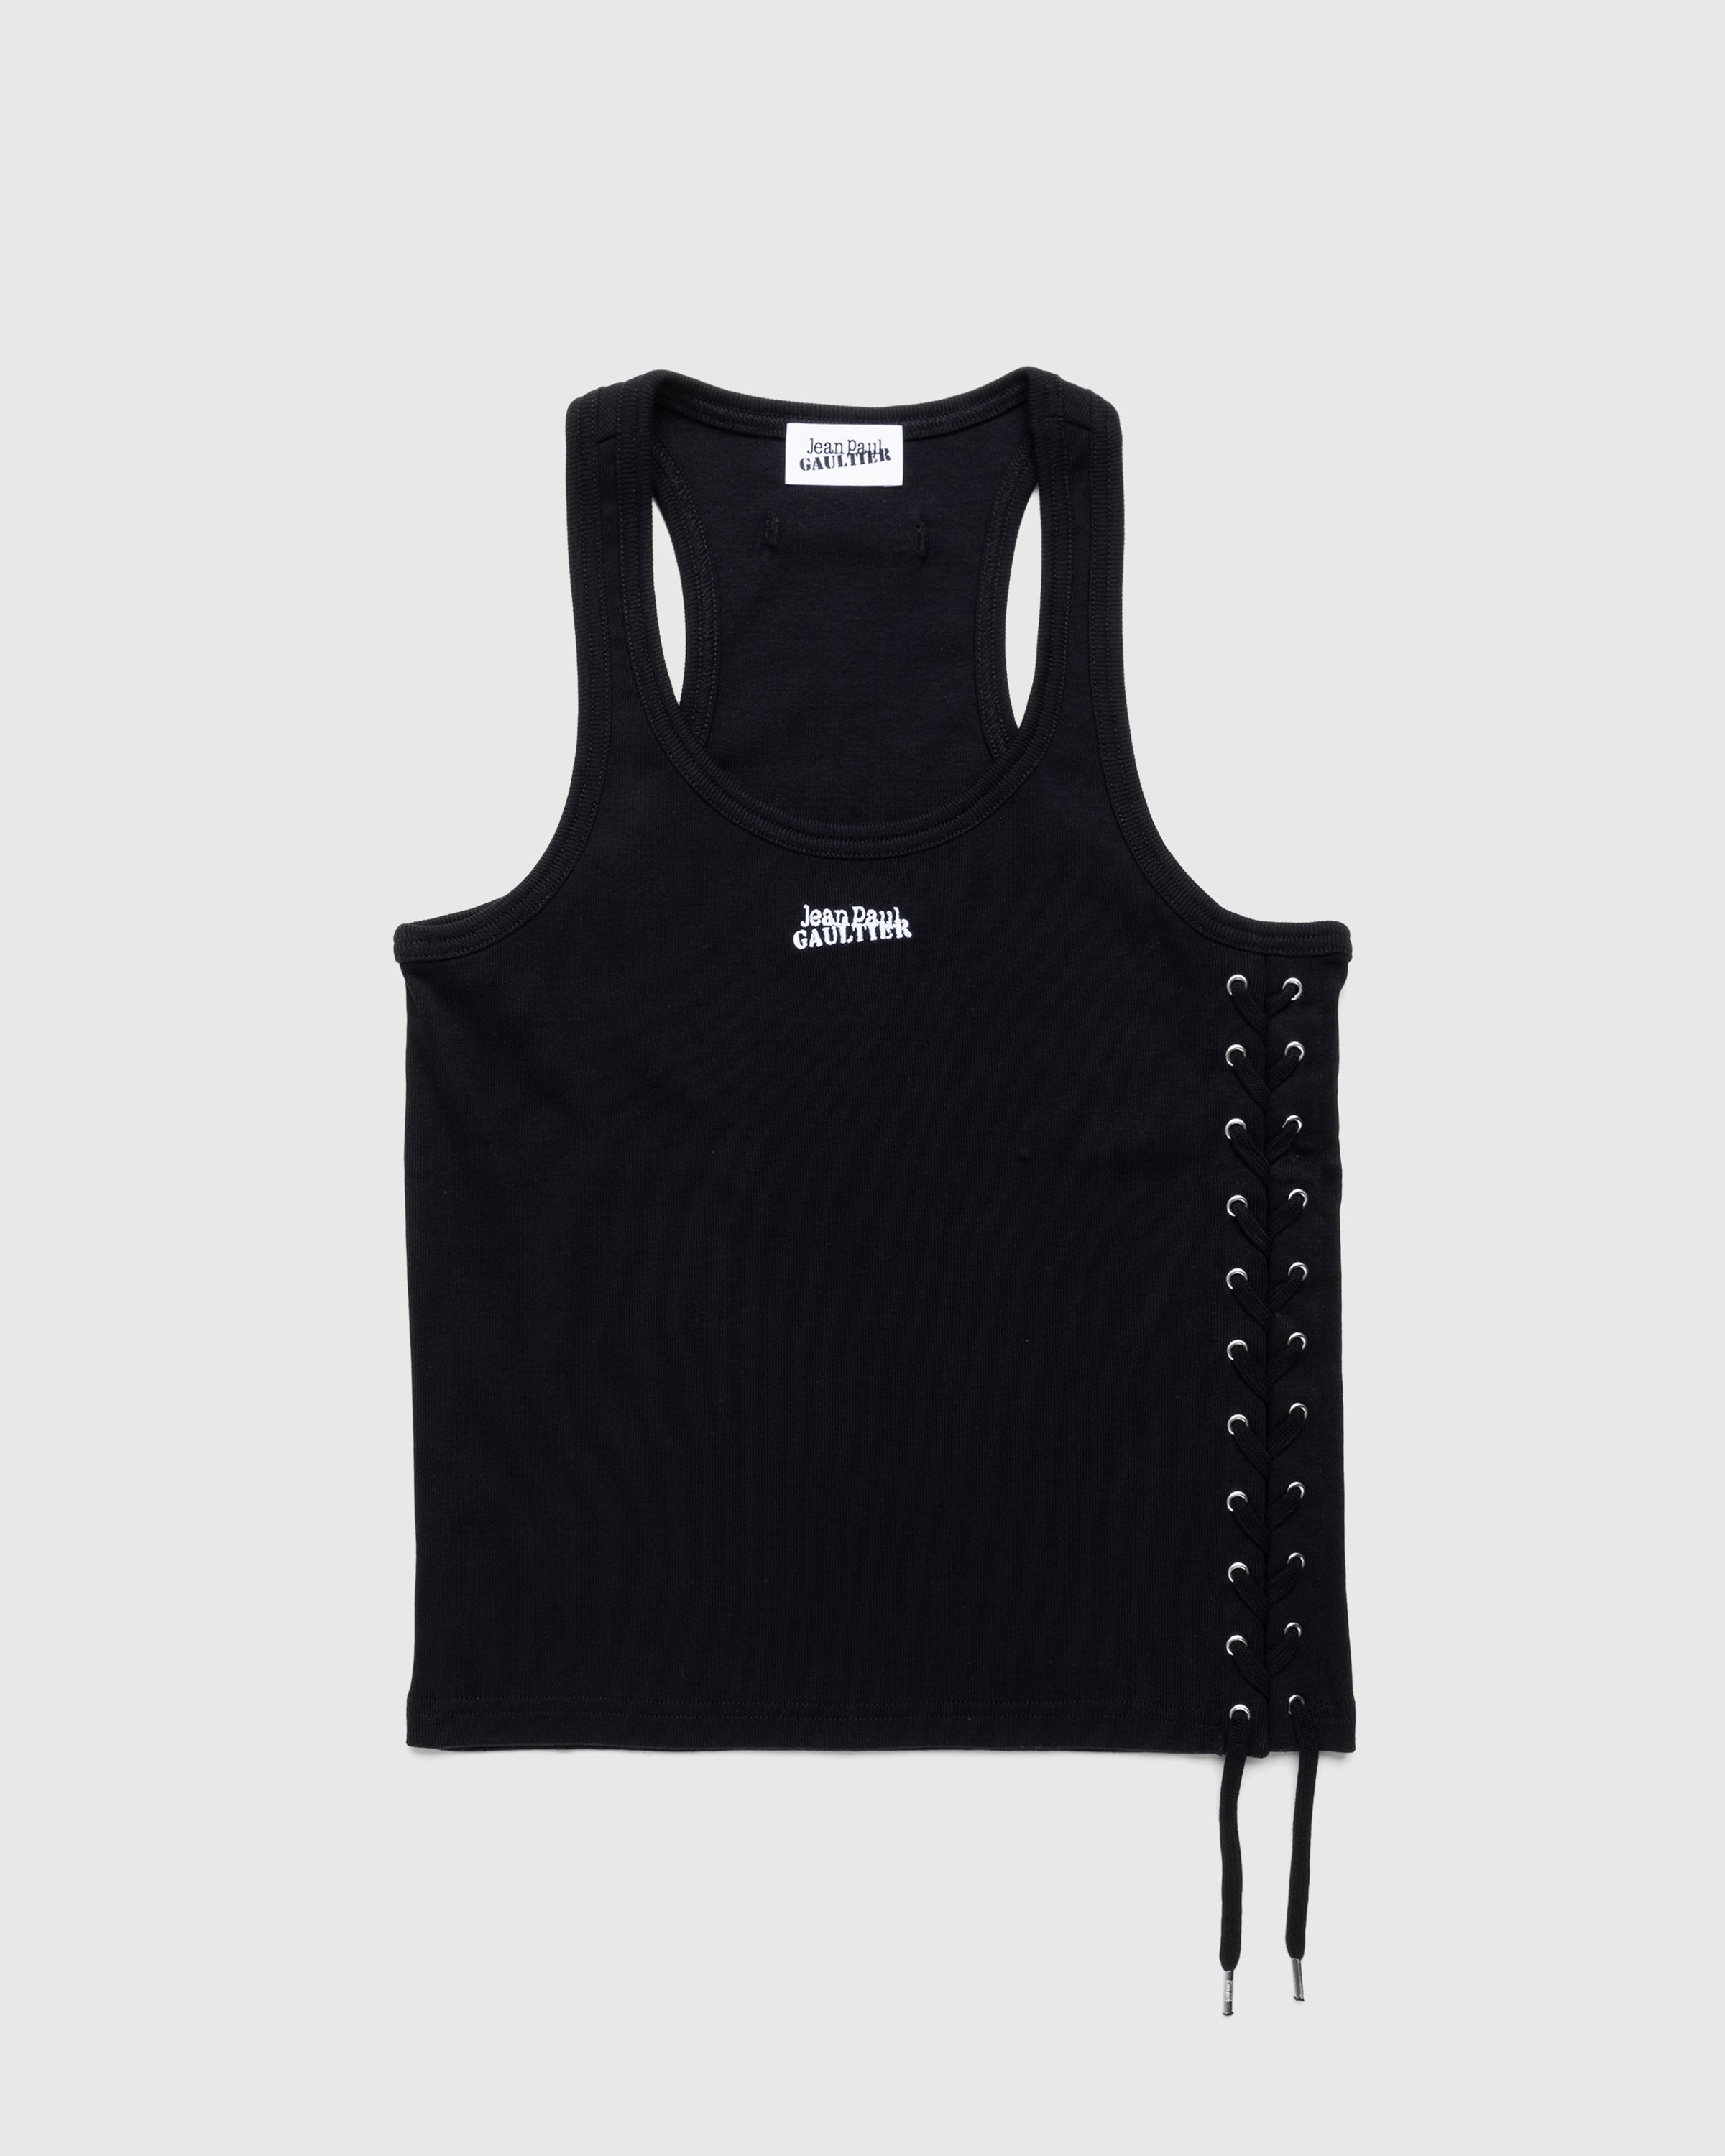 Jean Paul Gaultier - Laced Tank Top Black - Clothing - Black - Image 1